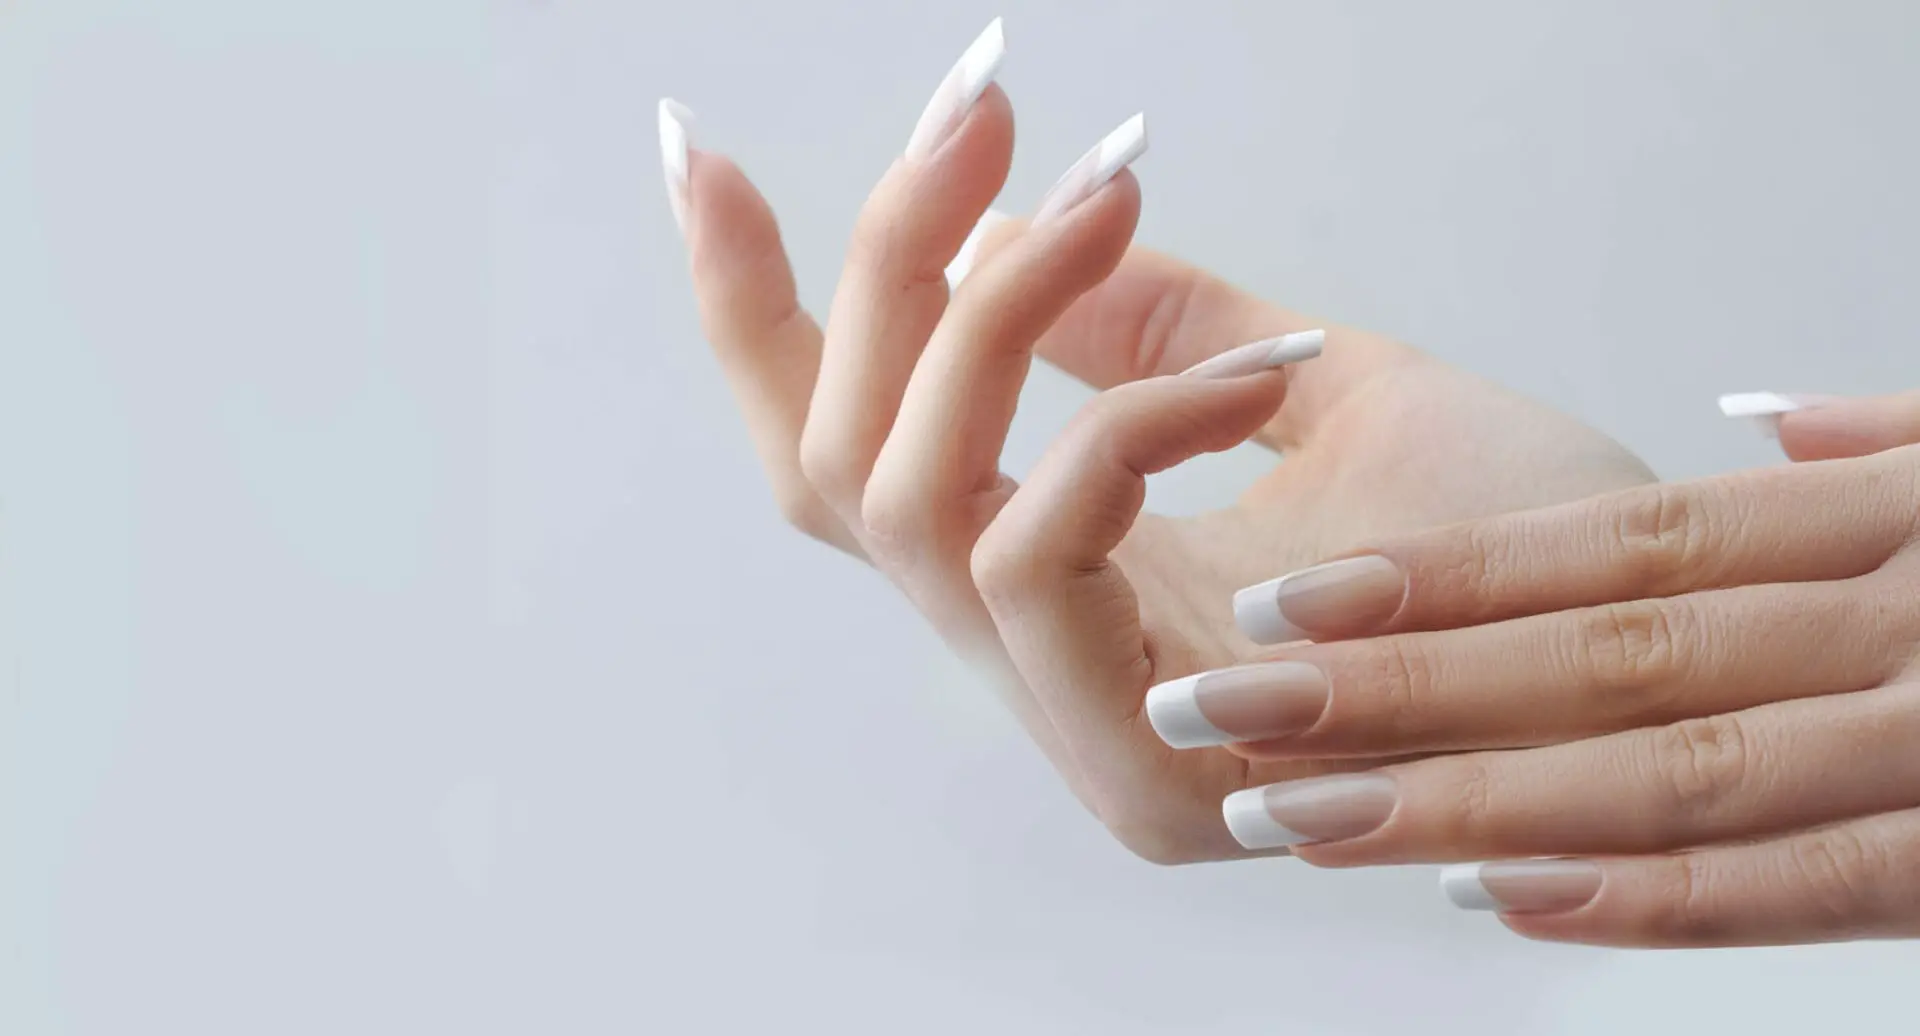 How To Make Your Nails Grow Faster: The Beauty Pros Share Their Secret